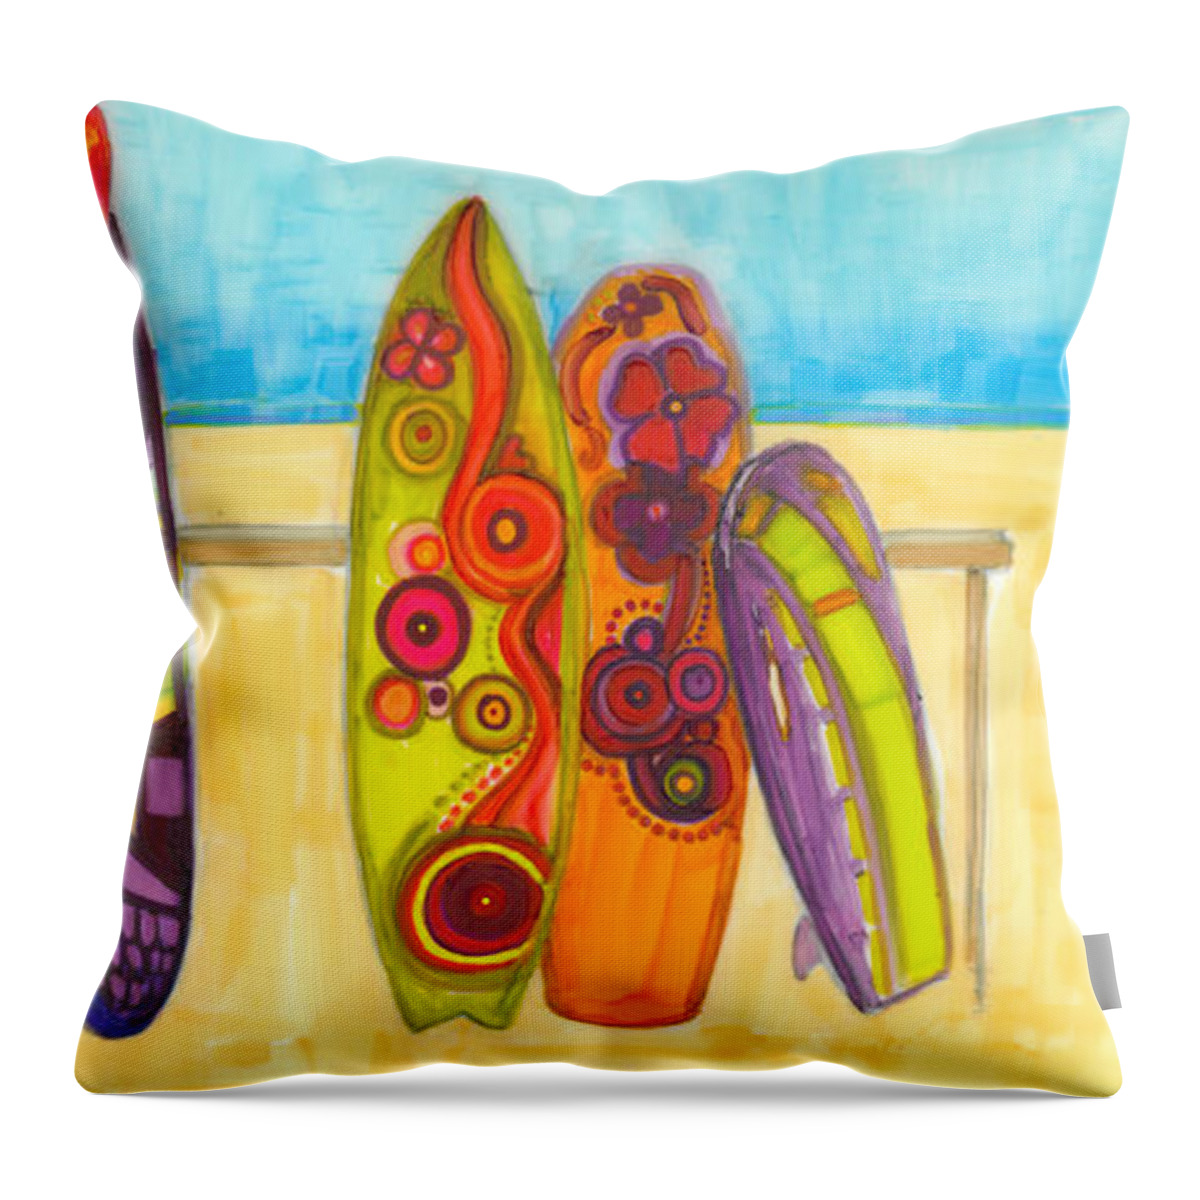 Surfing Buddies Throw Pillow featuring the painting Surfing Buddies - Surf boards at the Beach illustration by Patricia Awapara